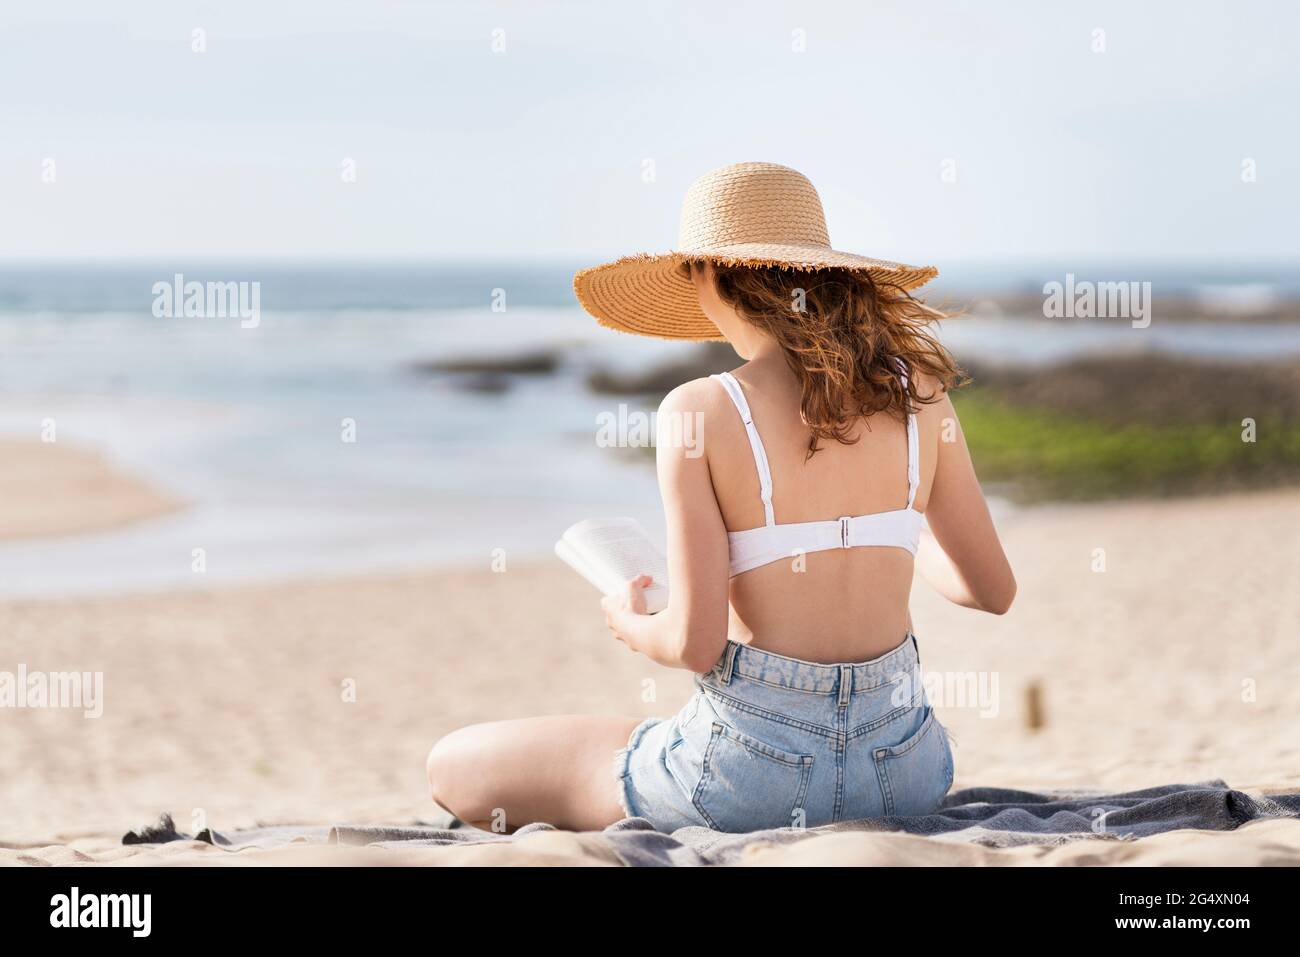 Woman wrapped in towel, rear view - Stock Image - F003/2579 - Science Photo  Library